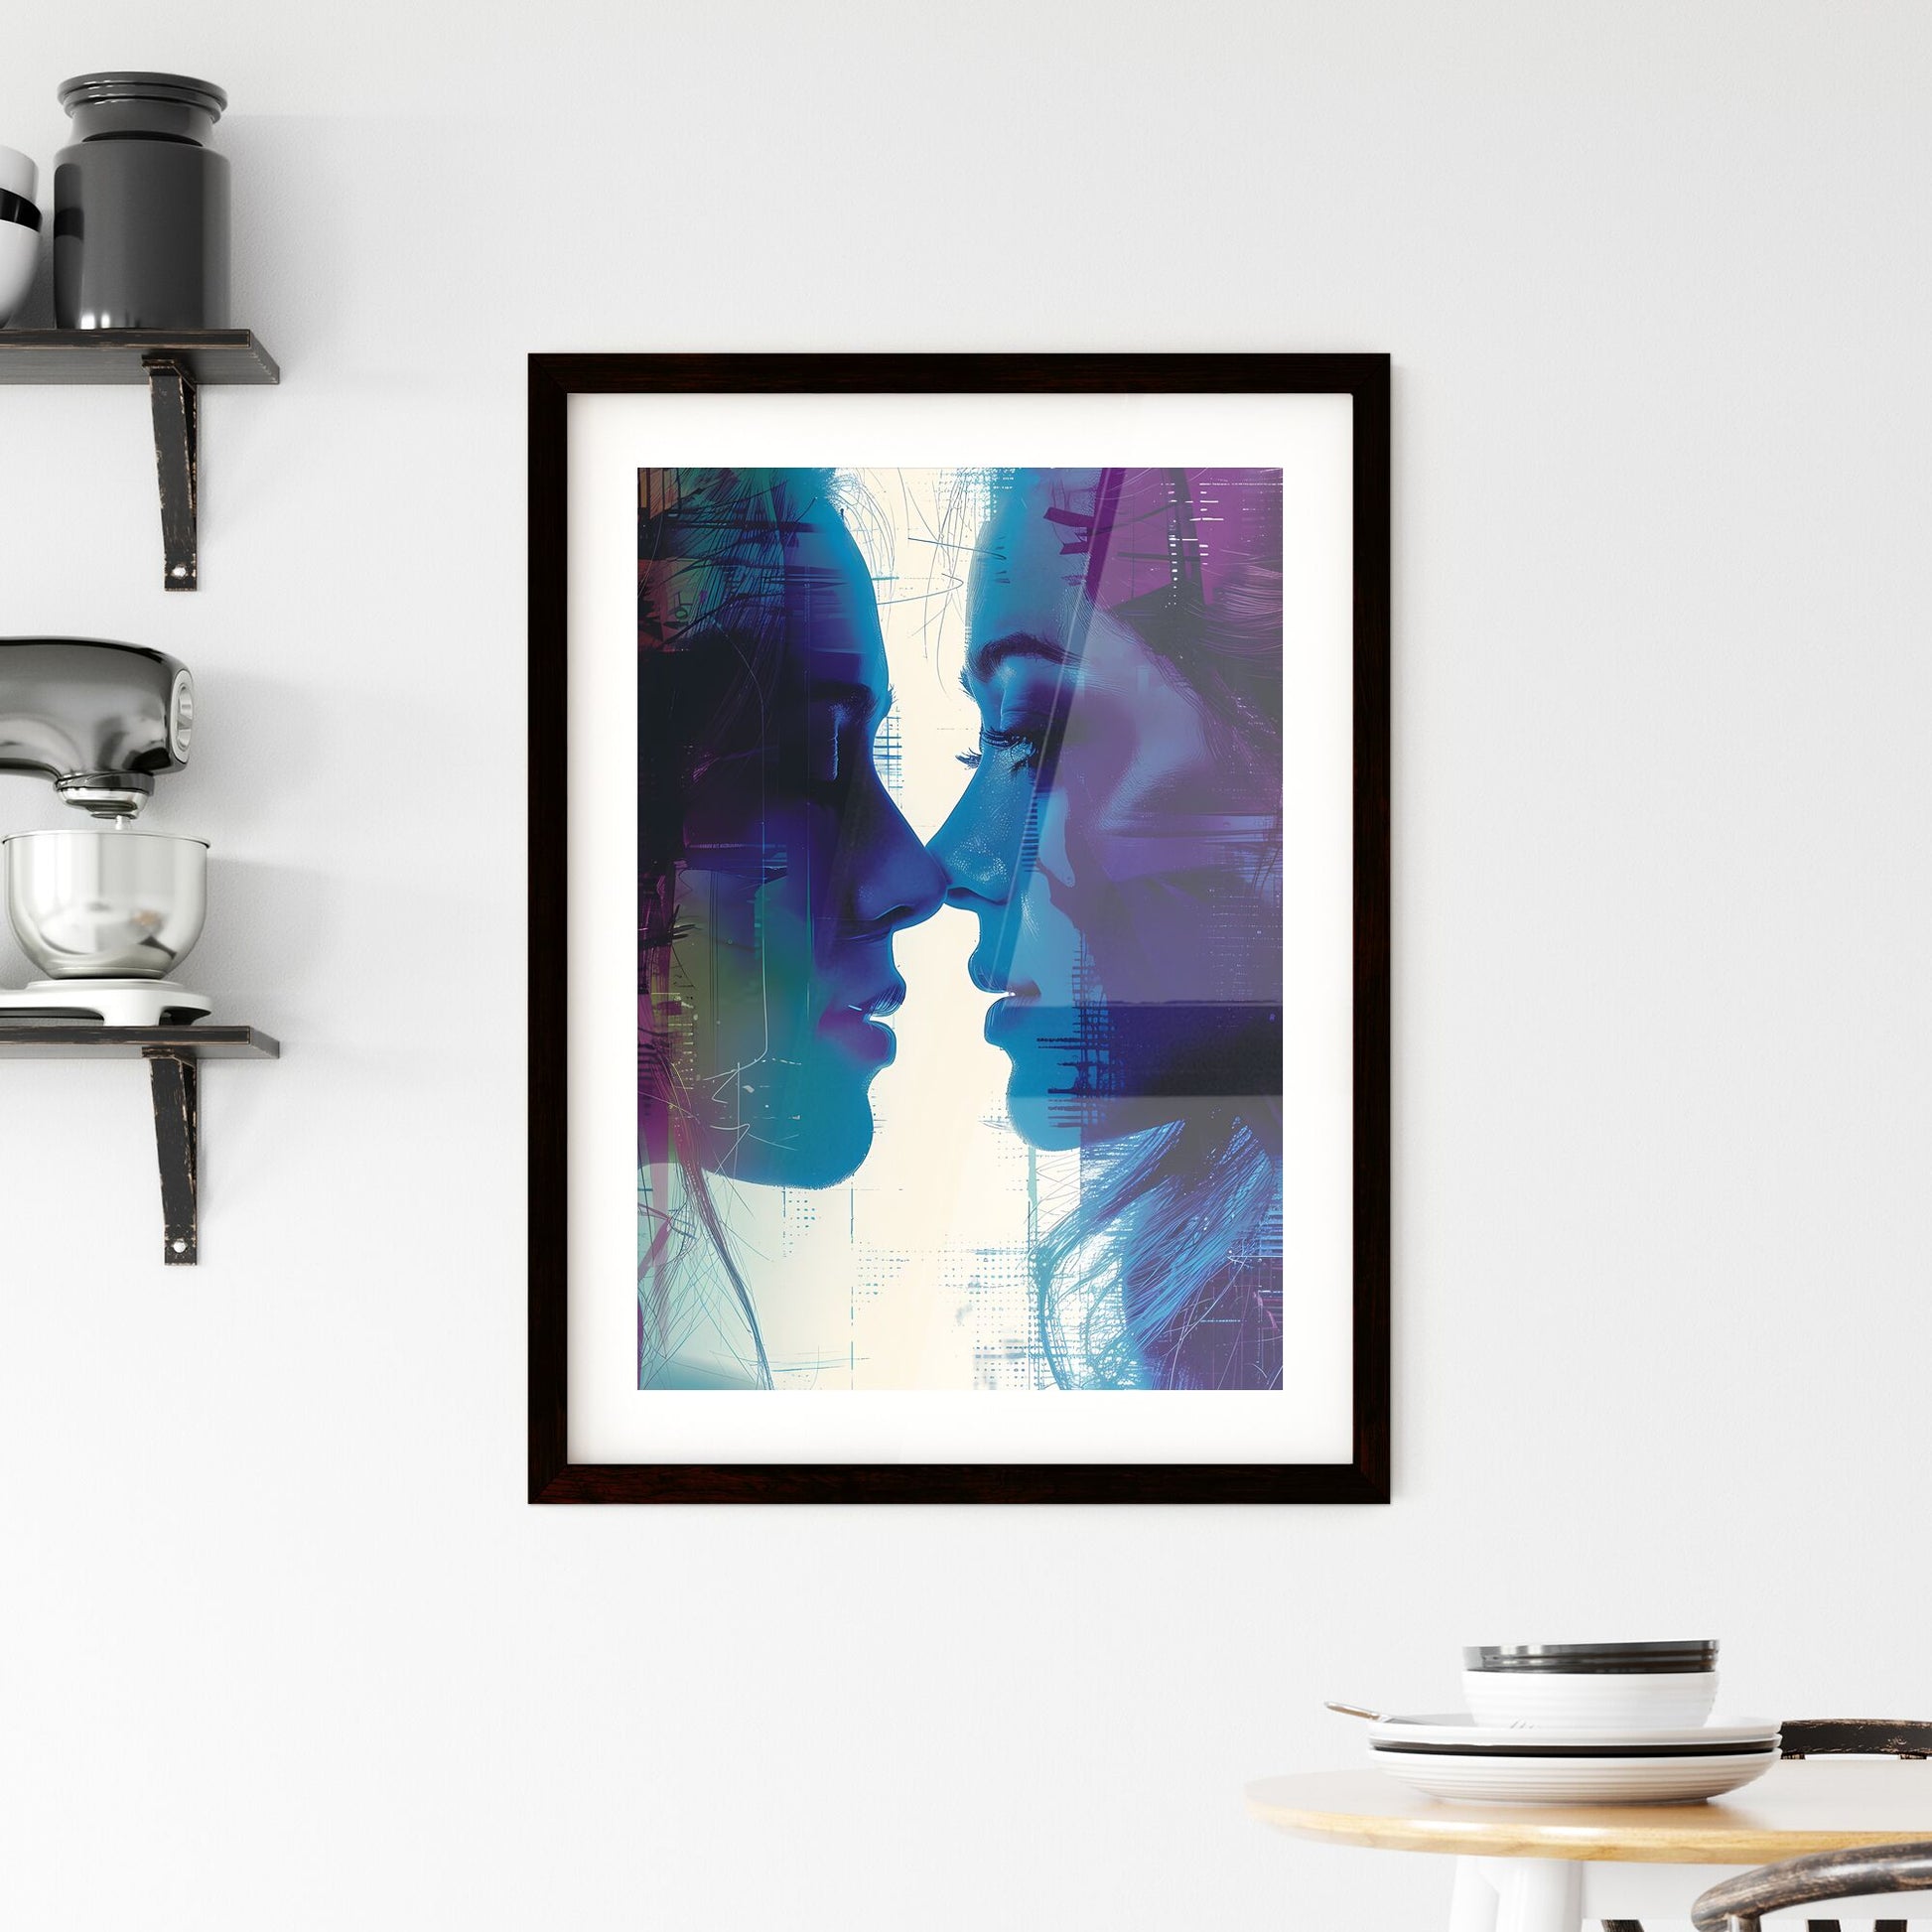 Vibrant Double Exposure Risoprint Artwork: Intense Hair-Pulling Duet by Two Women, Abstract Illustration Default Title